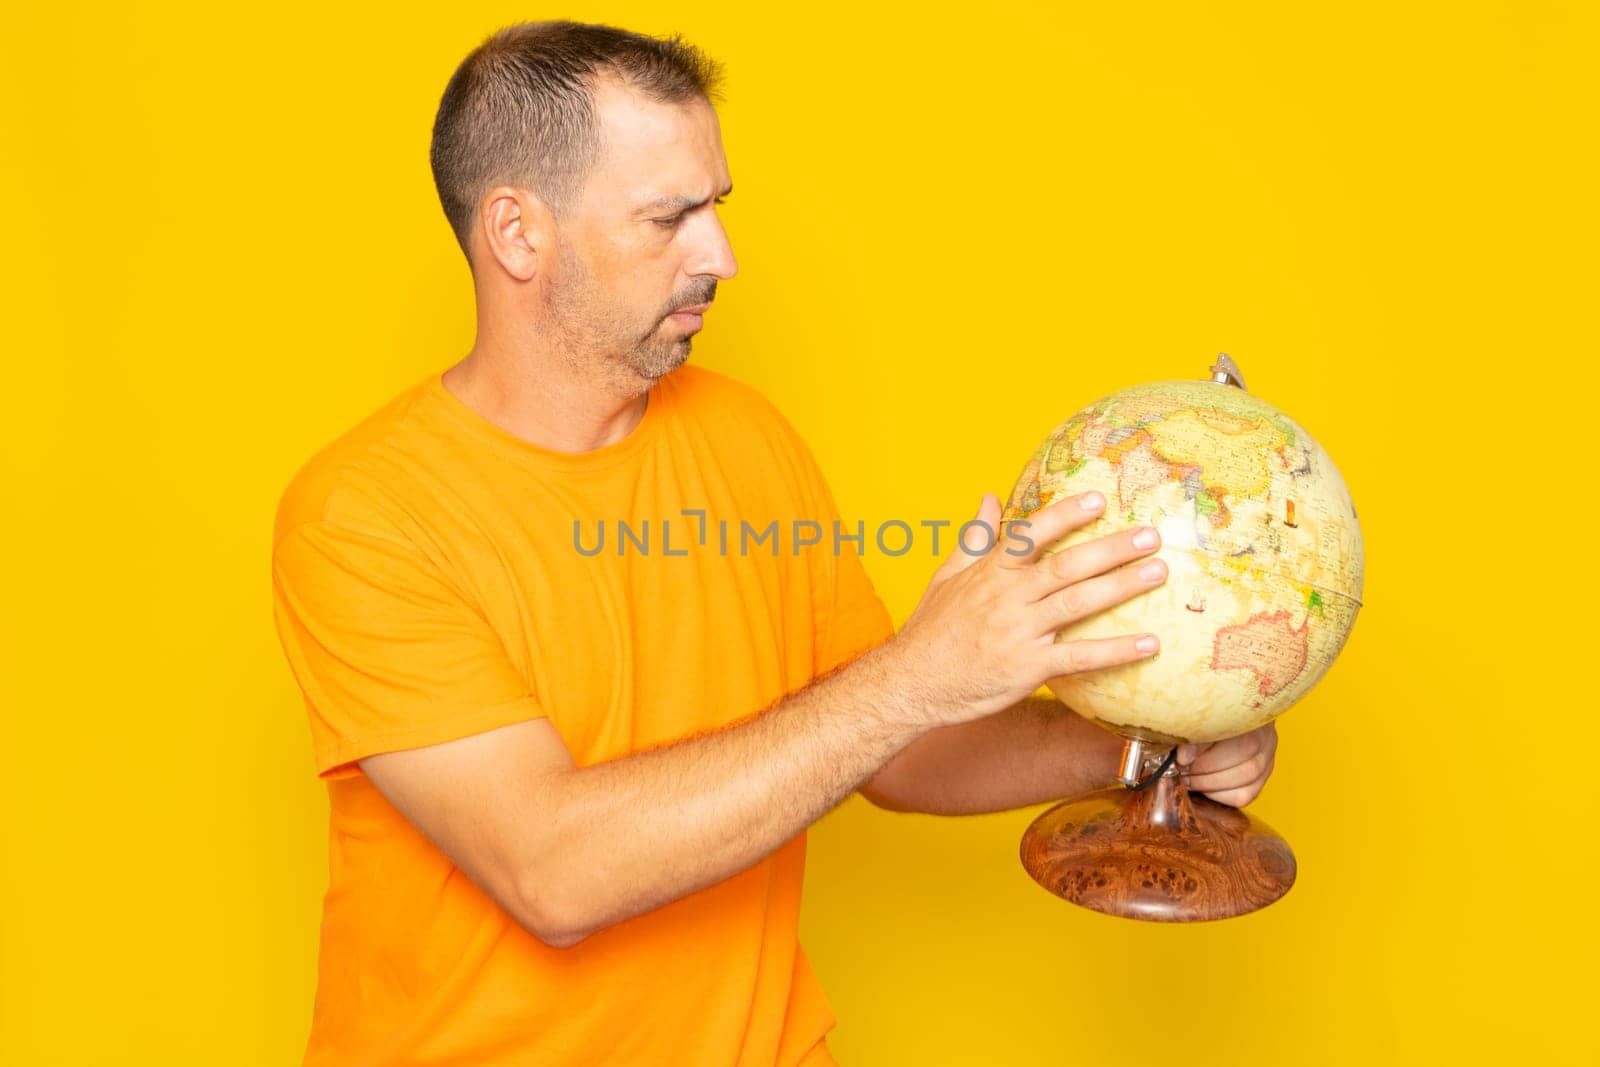 Hispanic man with beard in his 40s searching for a location on a world globe, isolated on yellow background. by Barriolo82